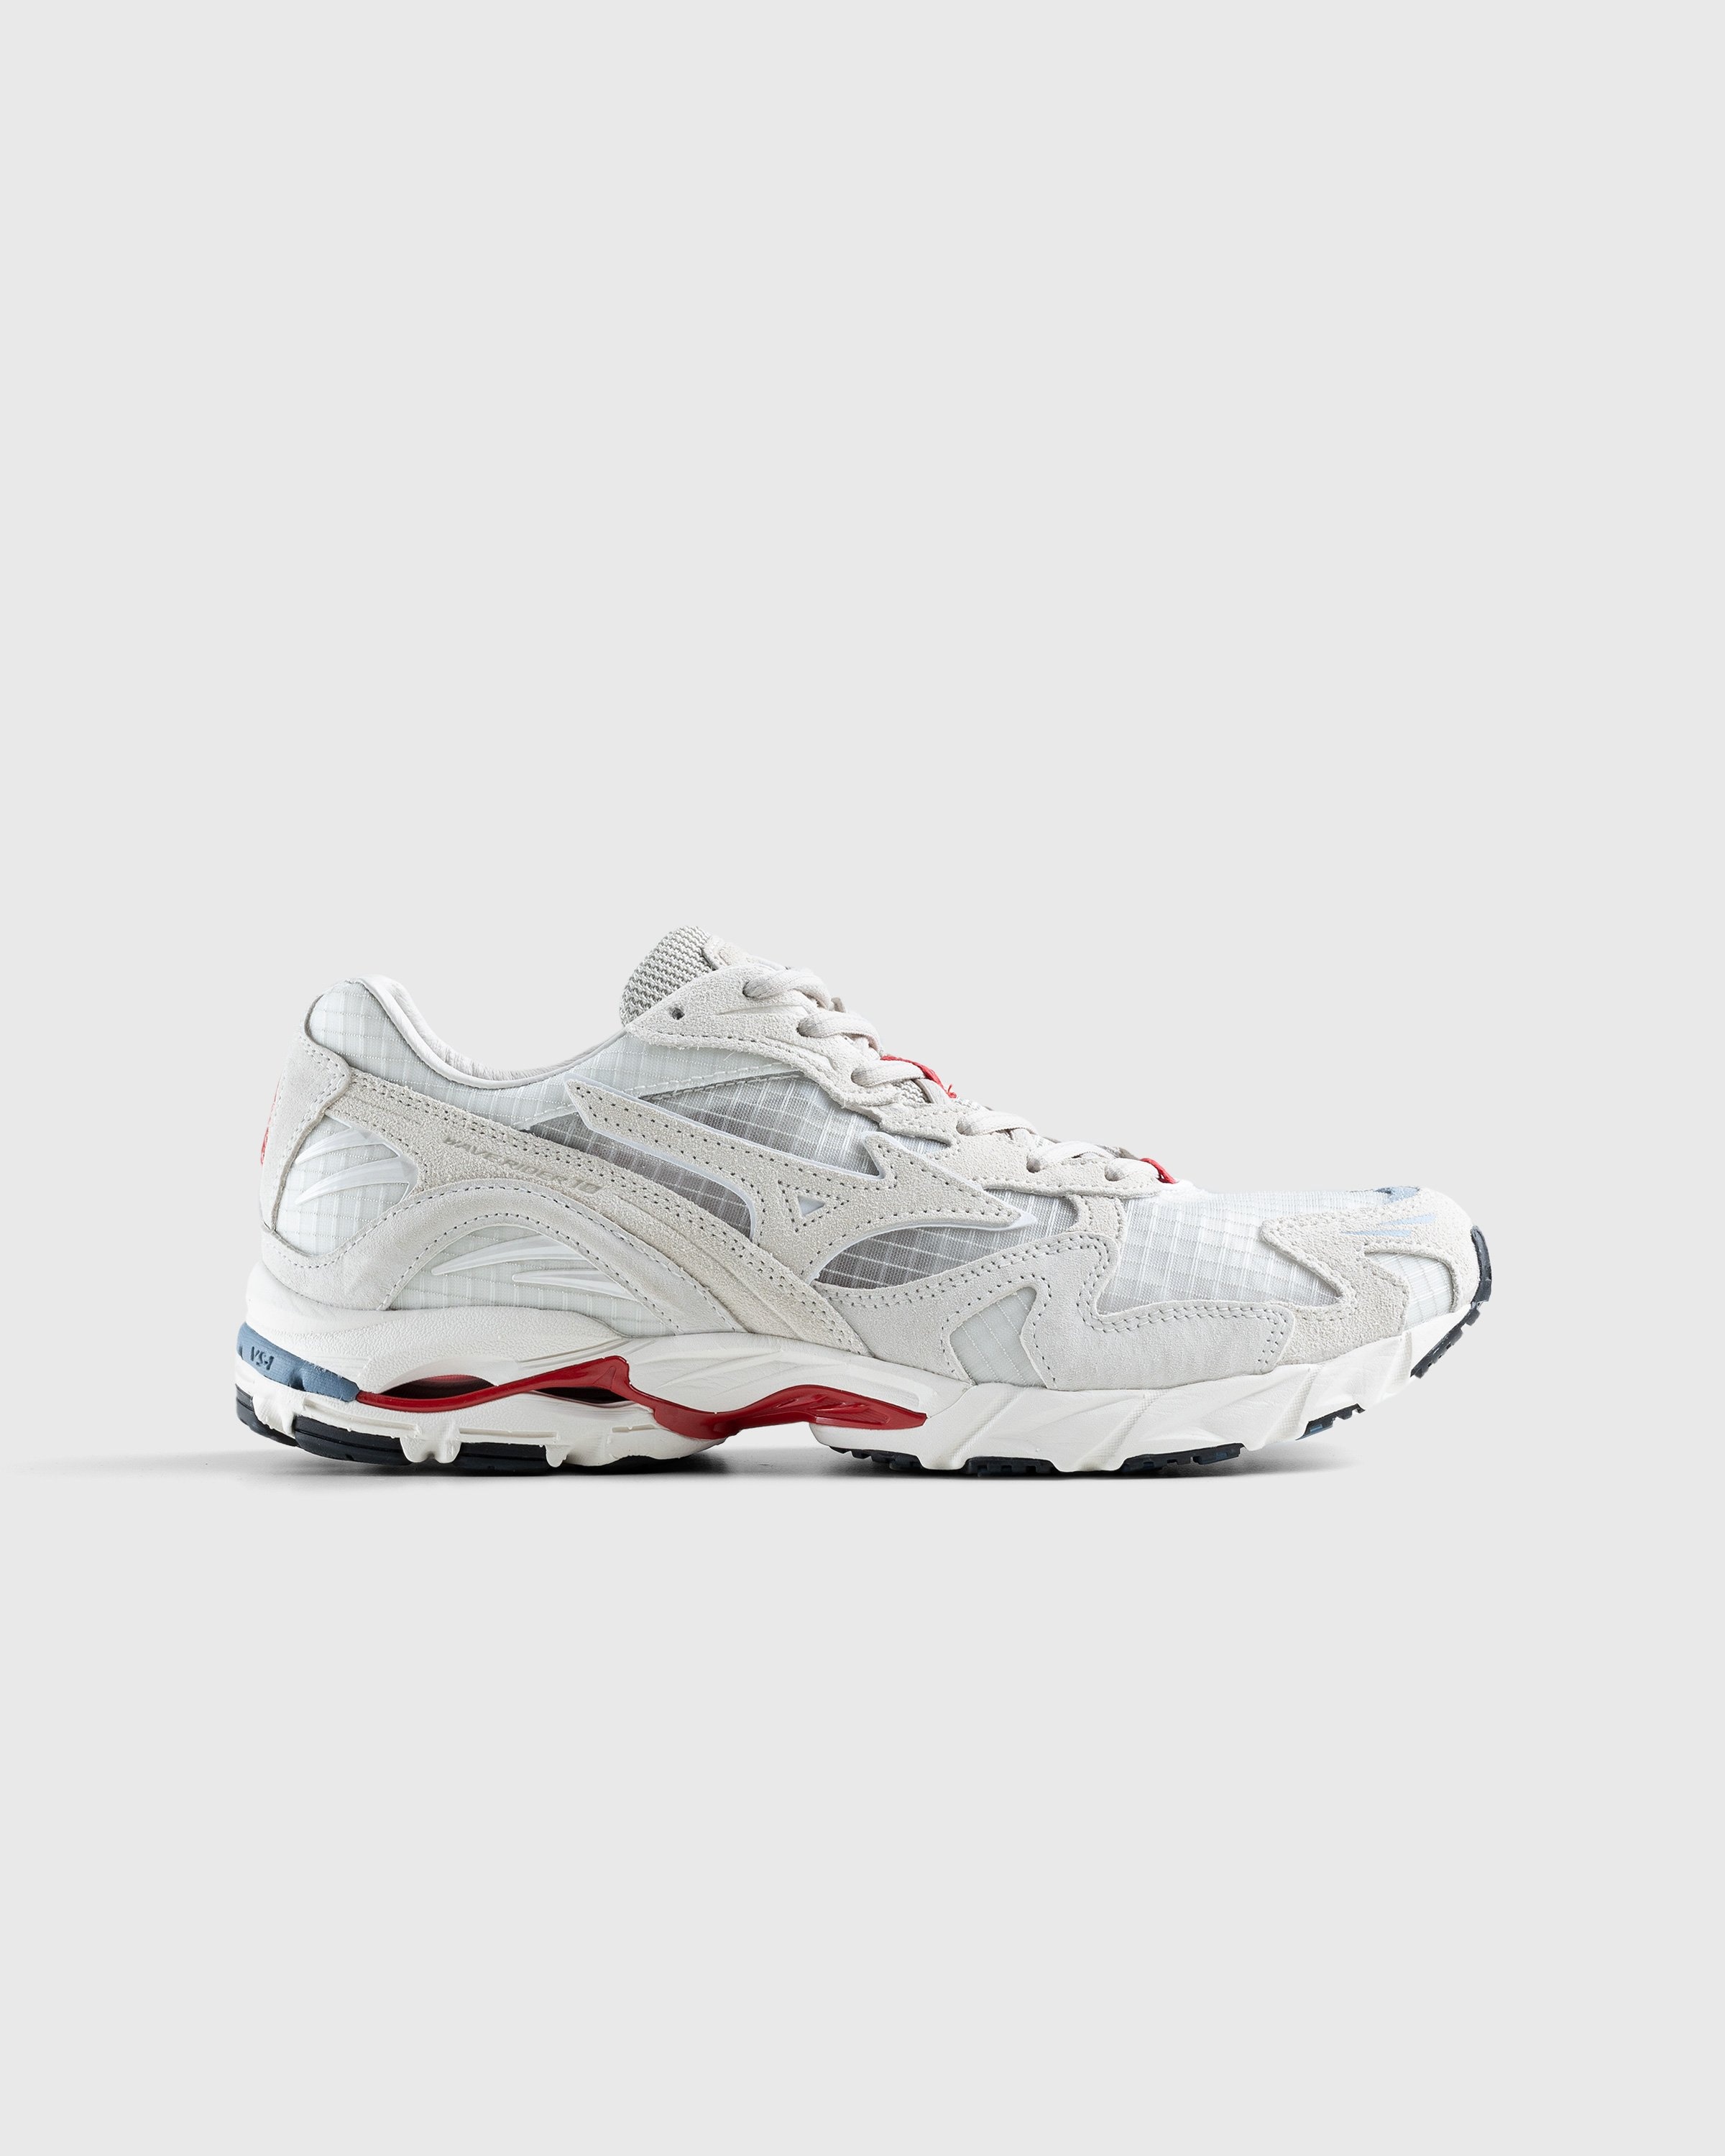 Mizuno x Highsnobiety – Wave Rider 10 White/Red - Low Top Sneakers - Grey - Image 1